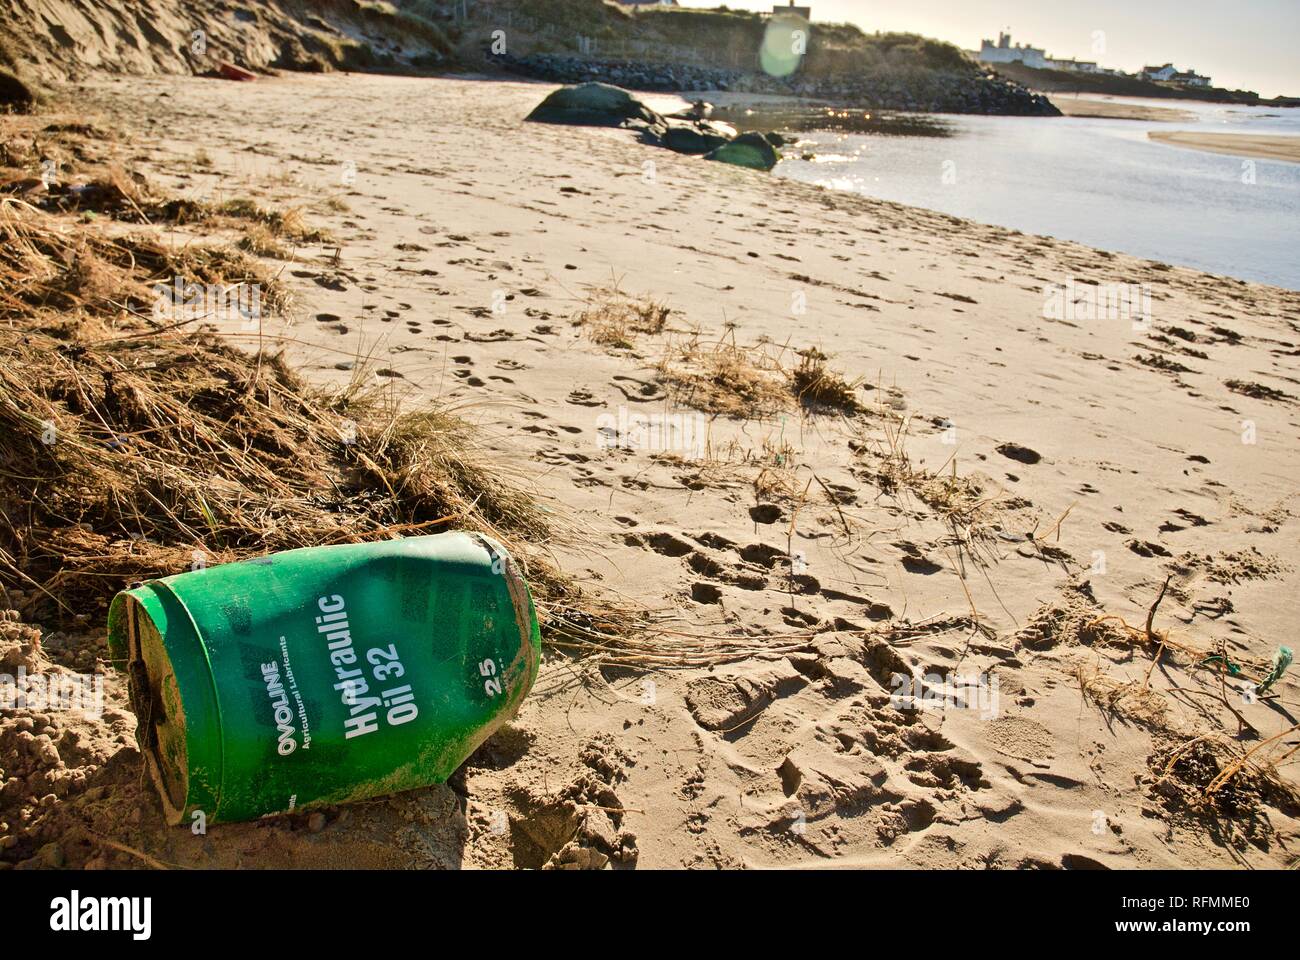 Plastic oil drum waste and pollution washed up on a beach in Rhosneigr, Anglesey, North Wales, UK Stock Photo